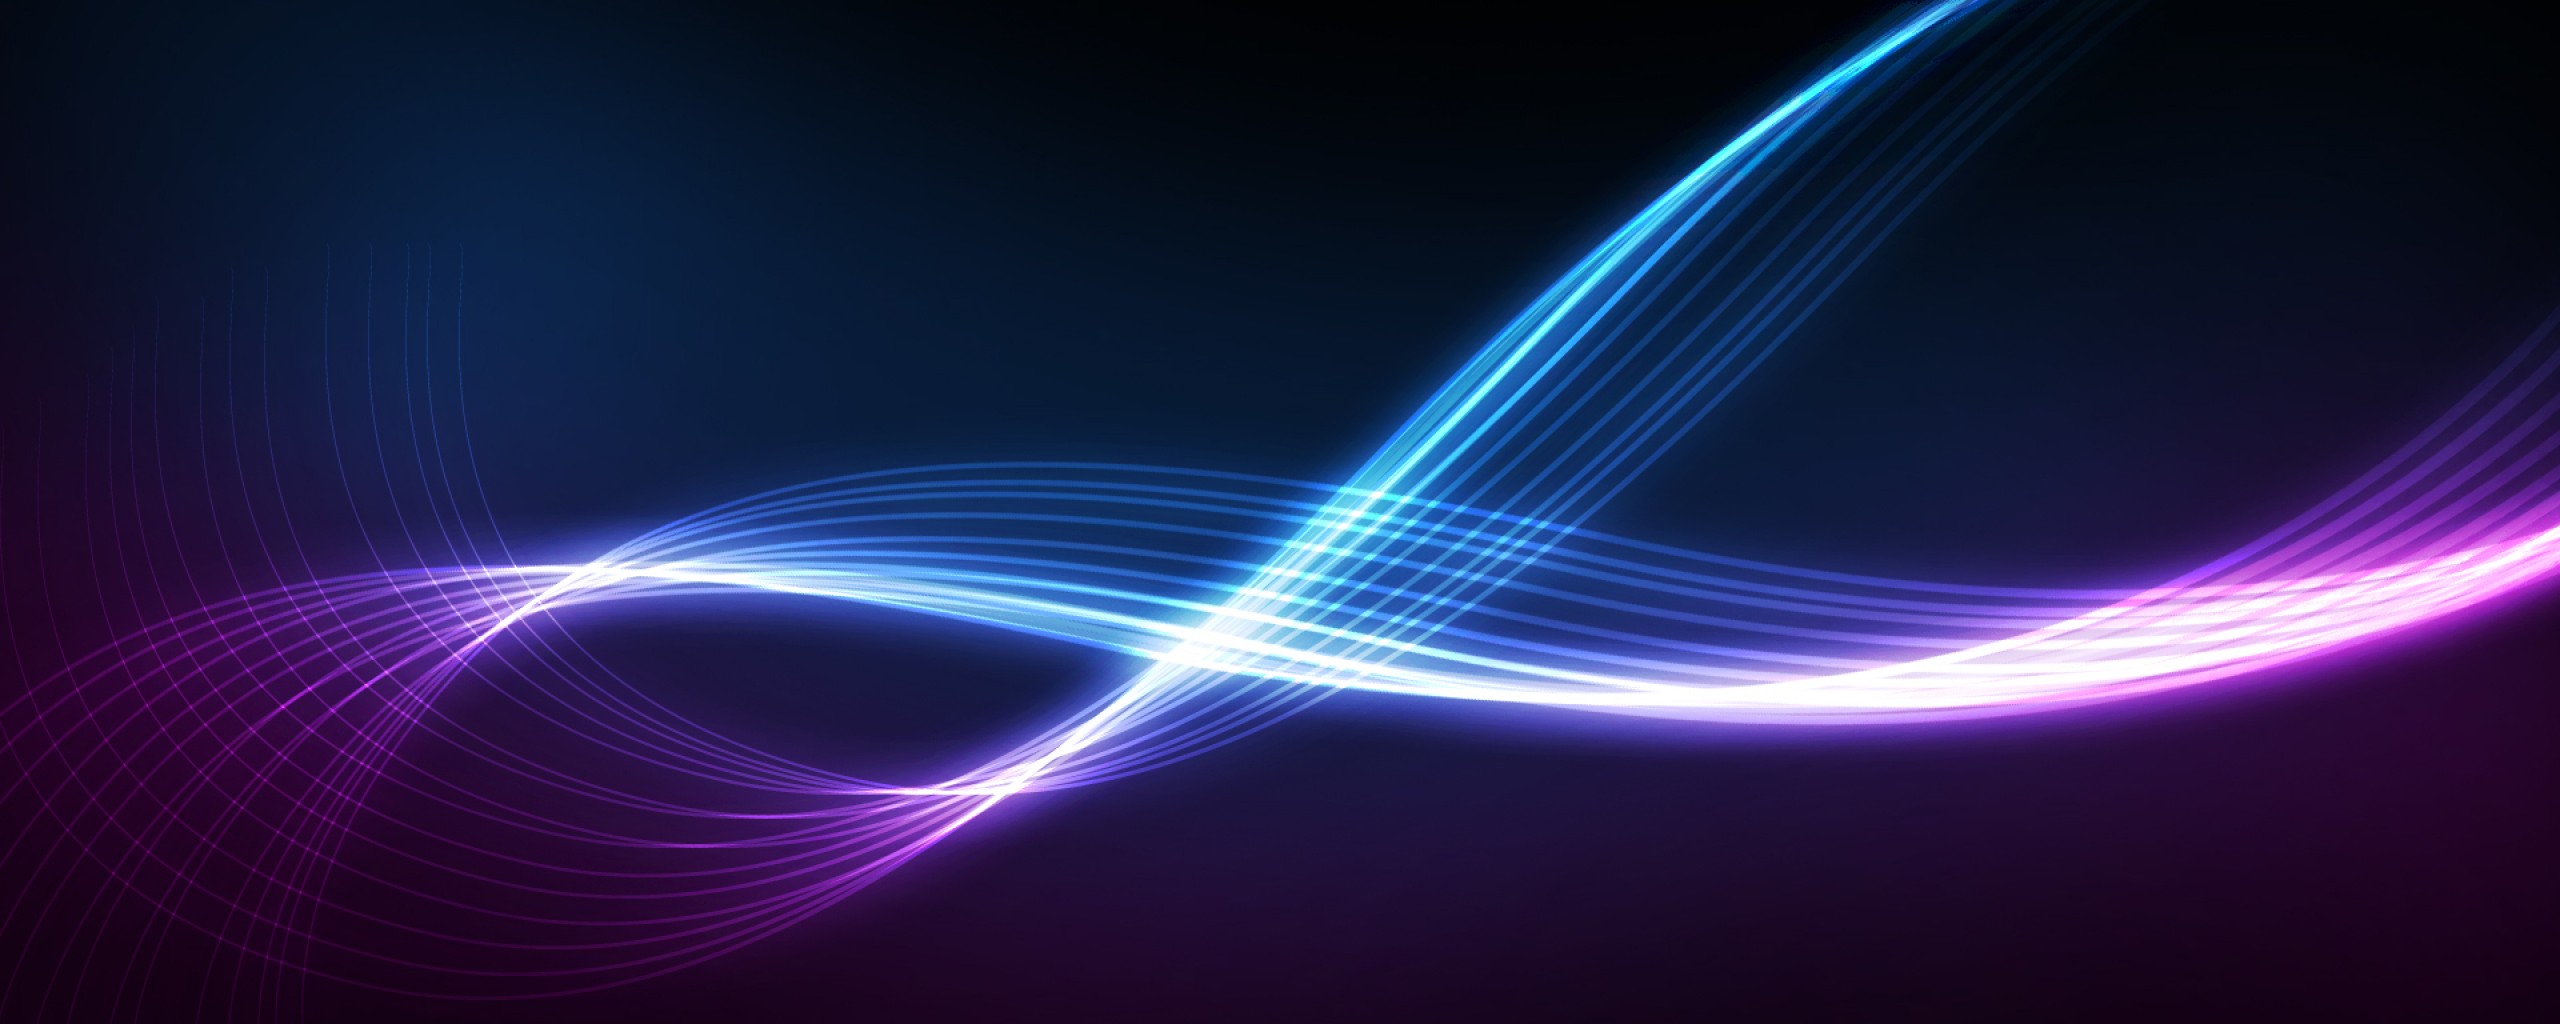 Purple and Blue Wallpapers HD wallpaper background